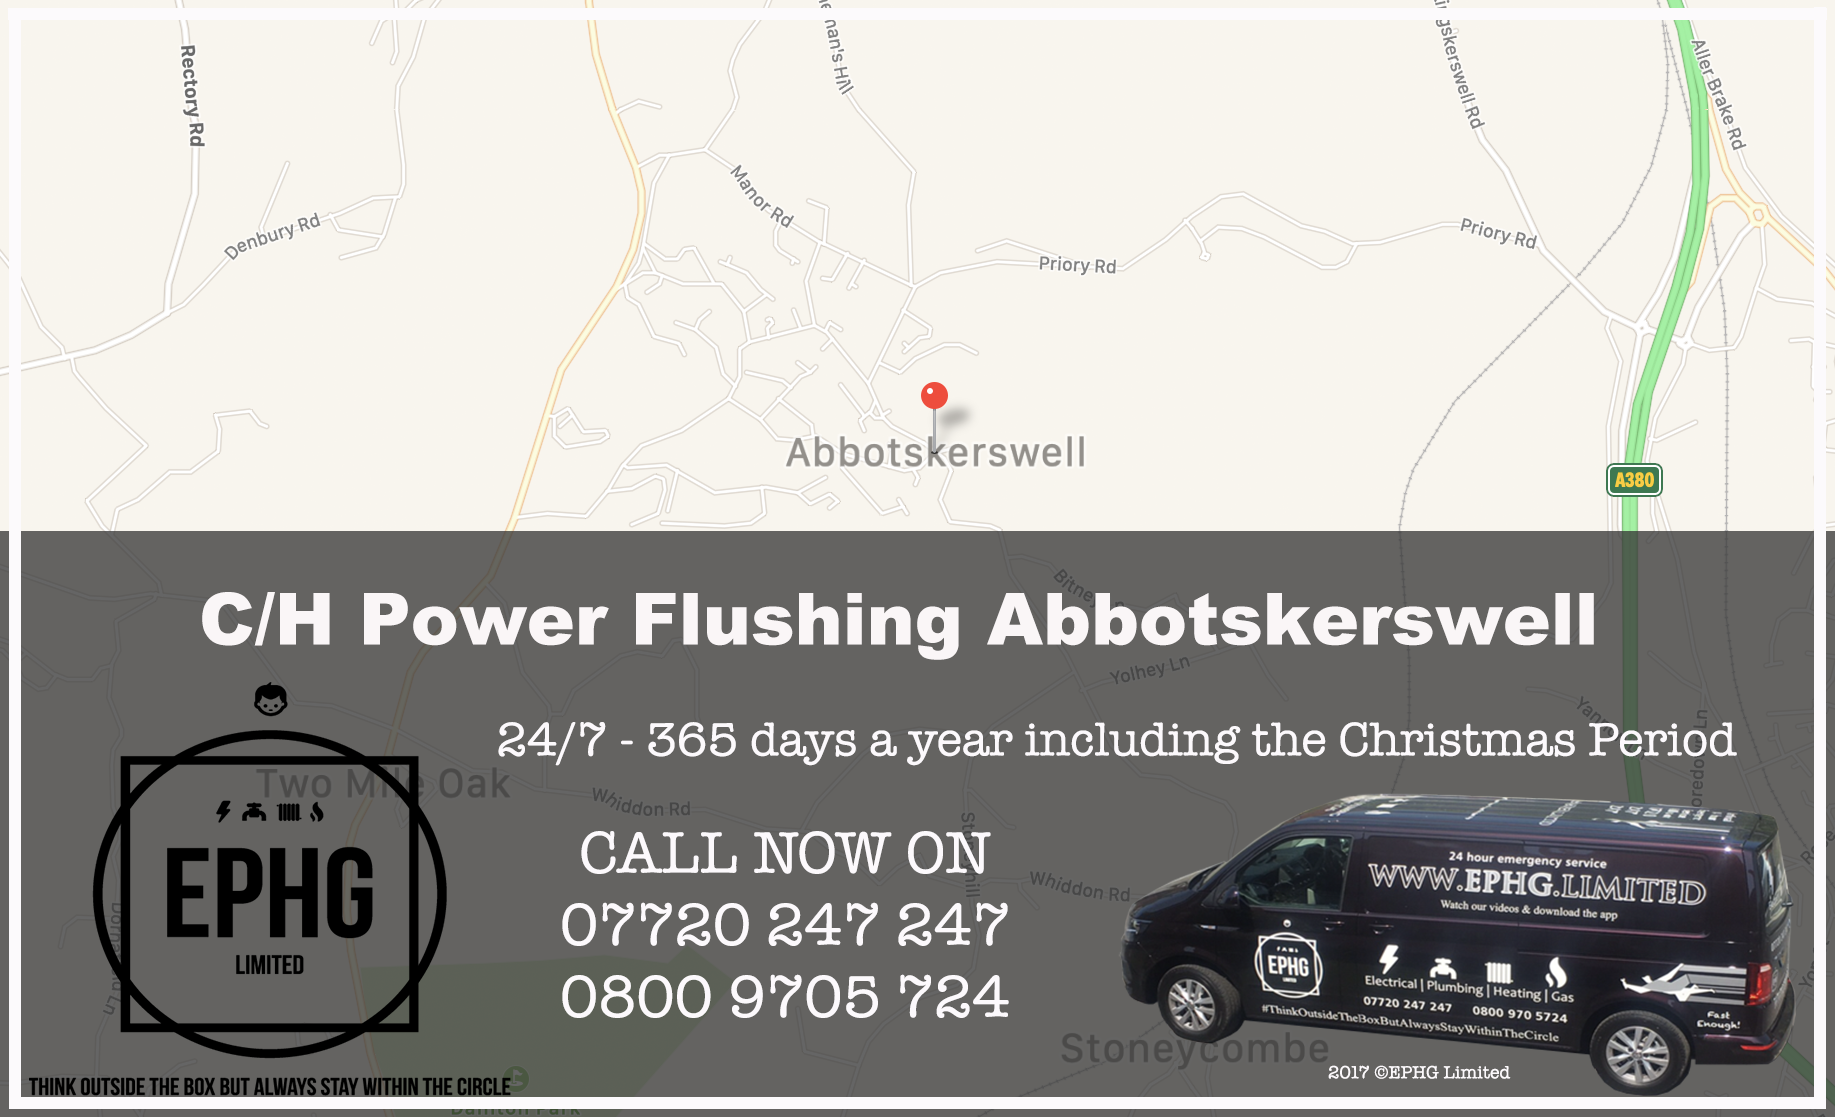 Central Heating Power Flush Abbotskerswell